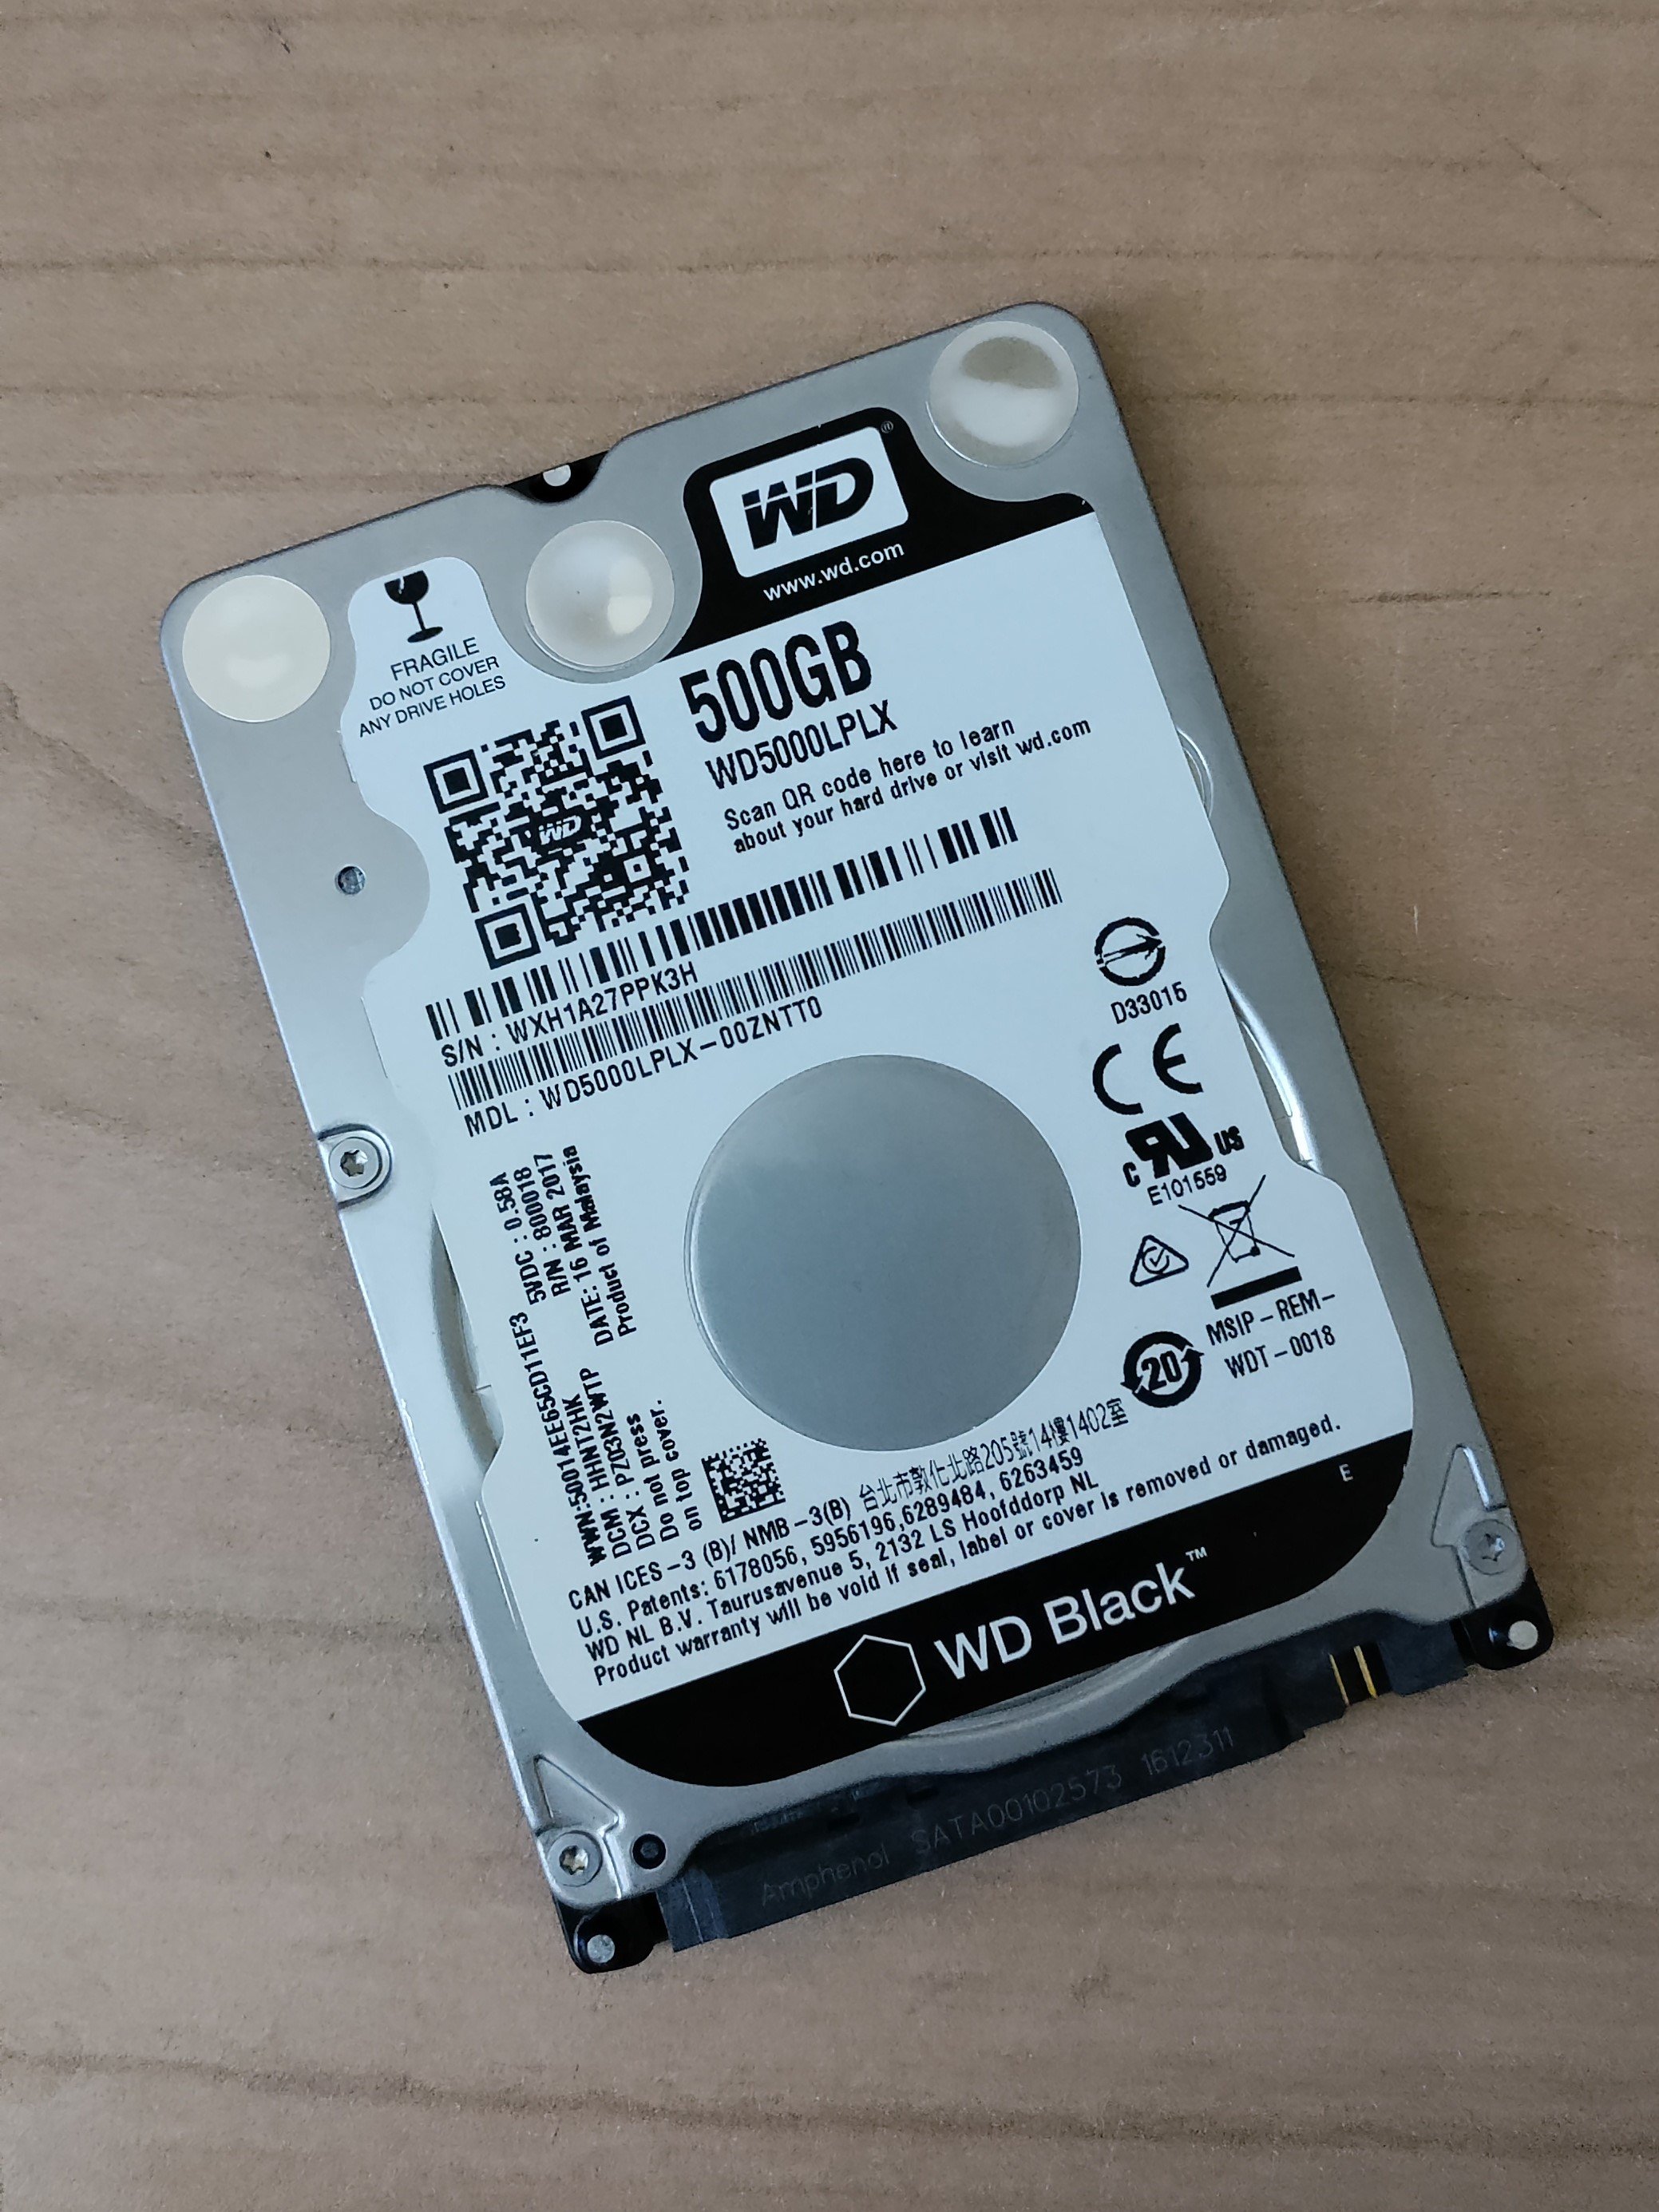 More information about "3x 2.5" Laptop HDD 500GB (2x WB Black + WD Blue)"